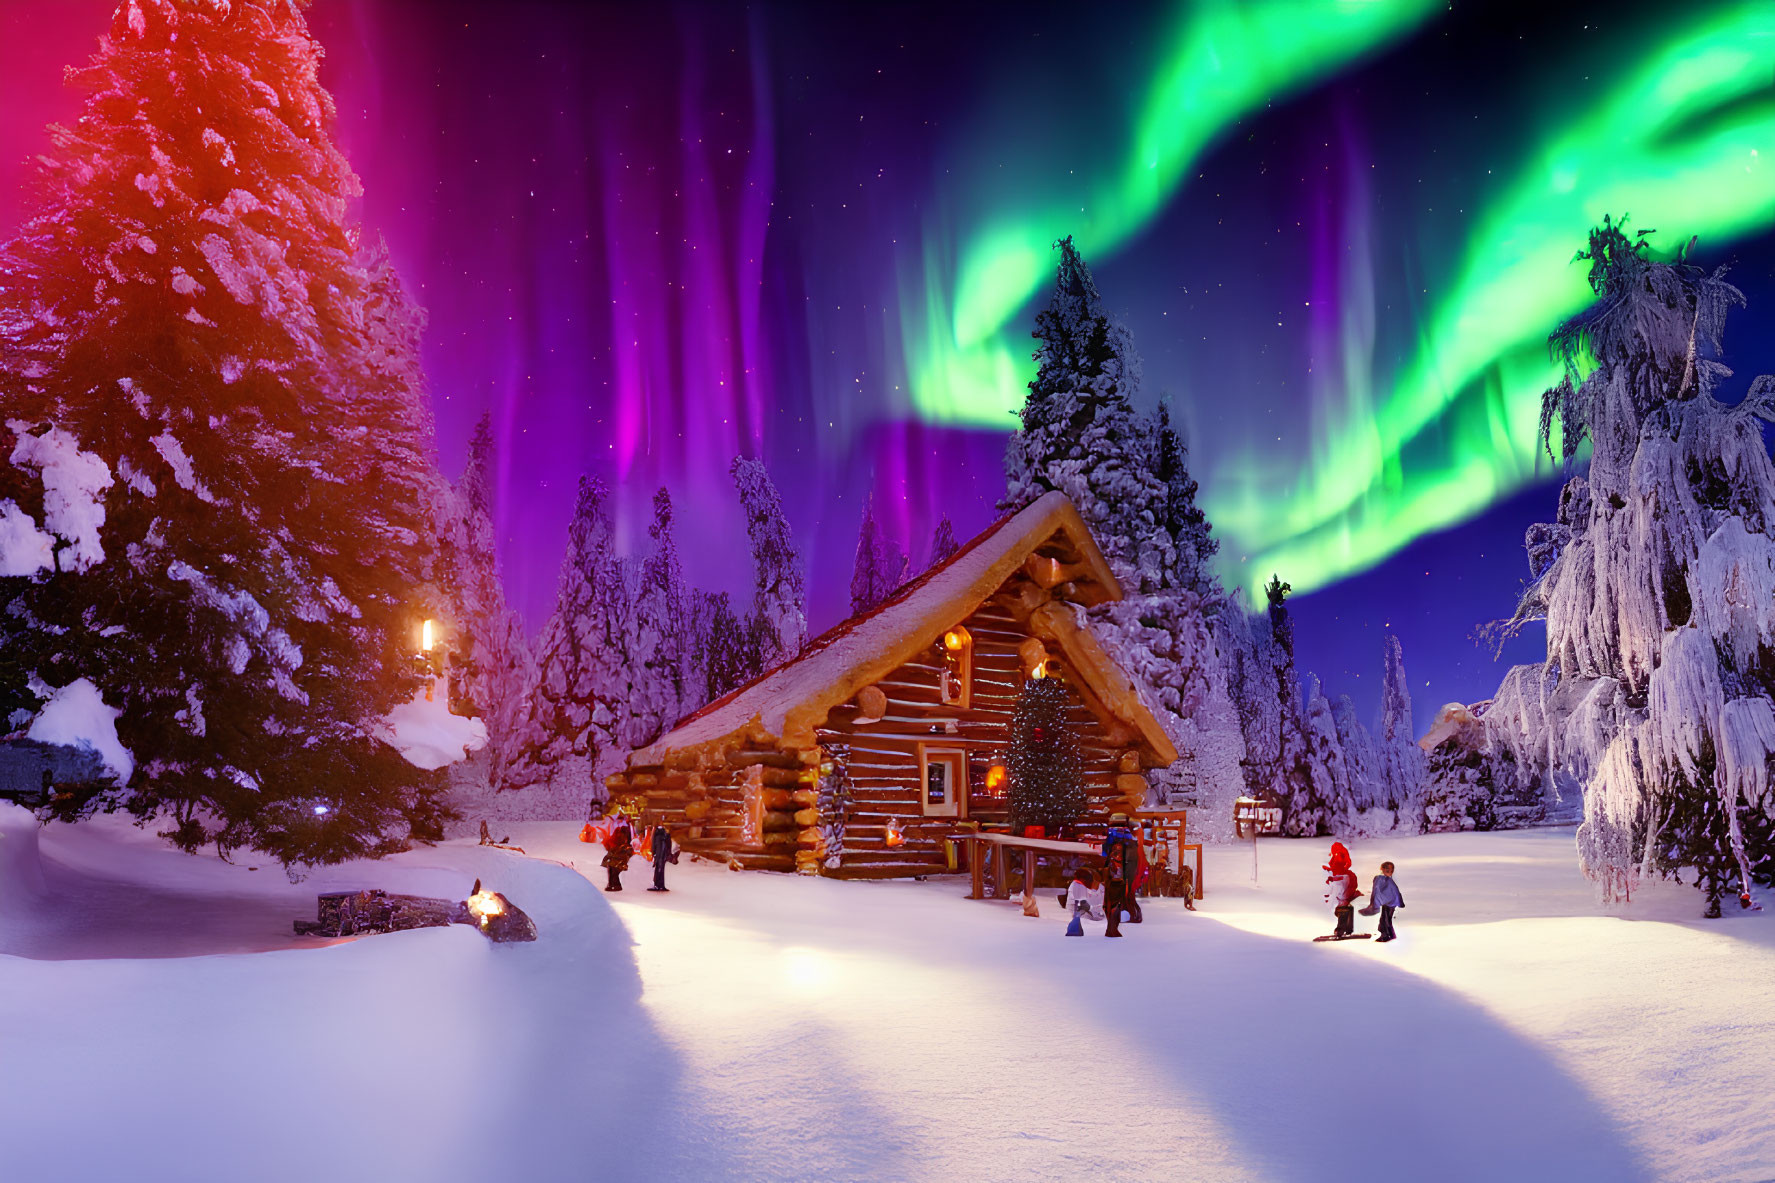 Snow-covered log cabin with festive lights under vibrant aurora borealis and snowy scenery